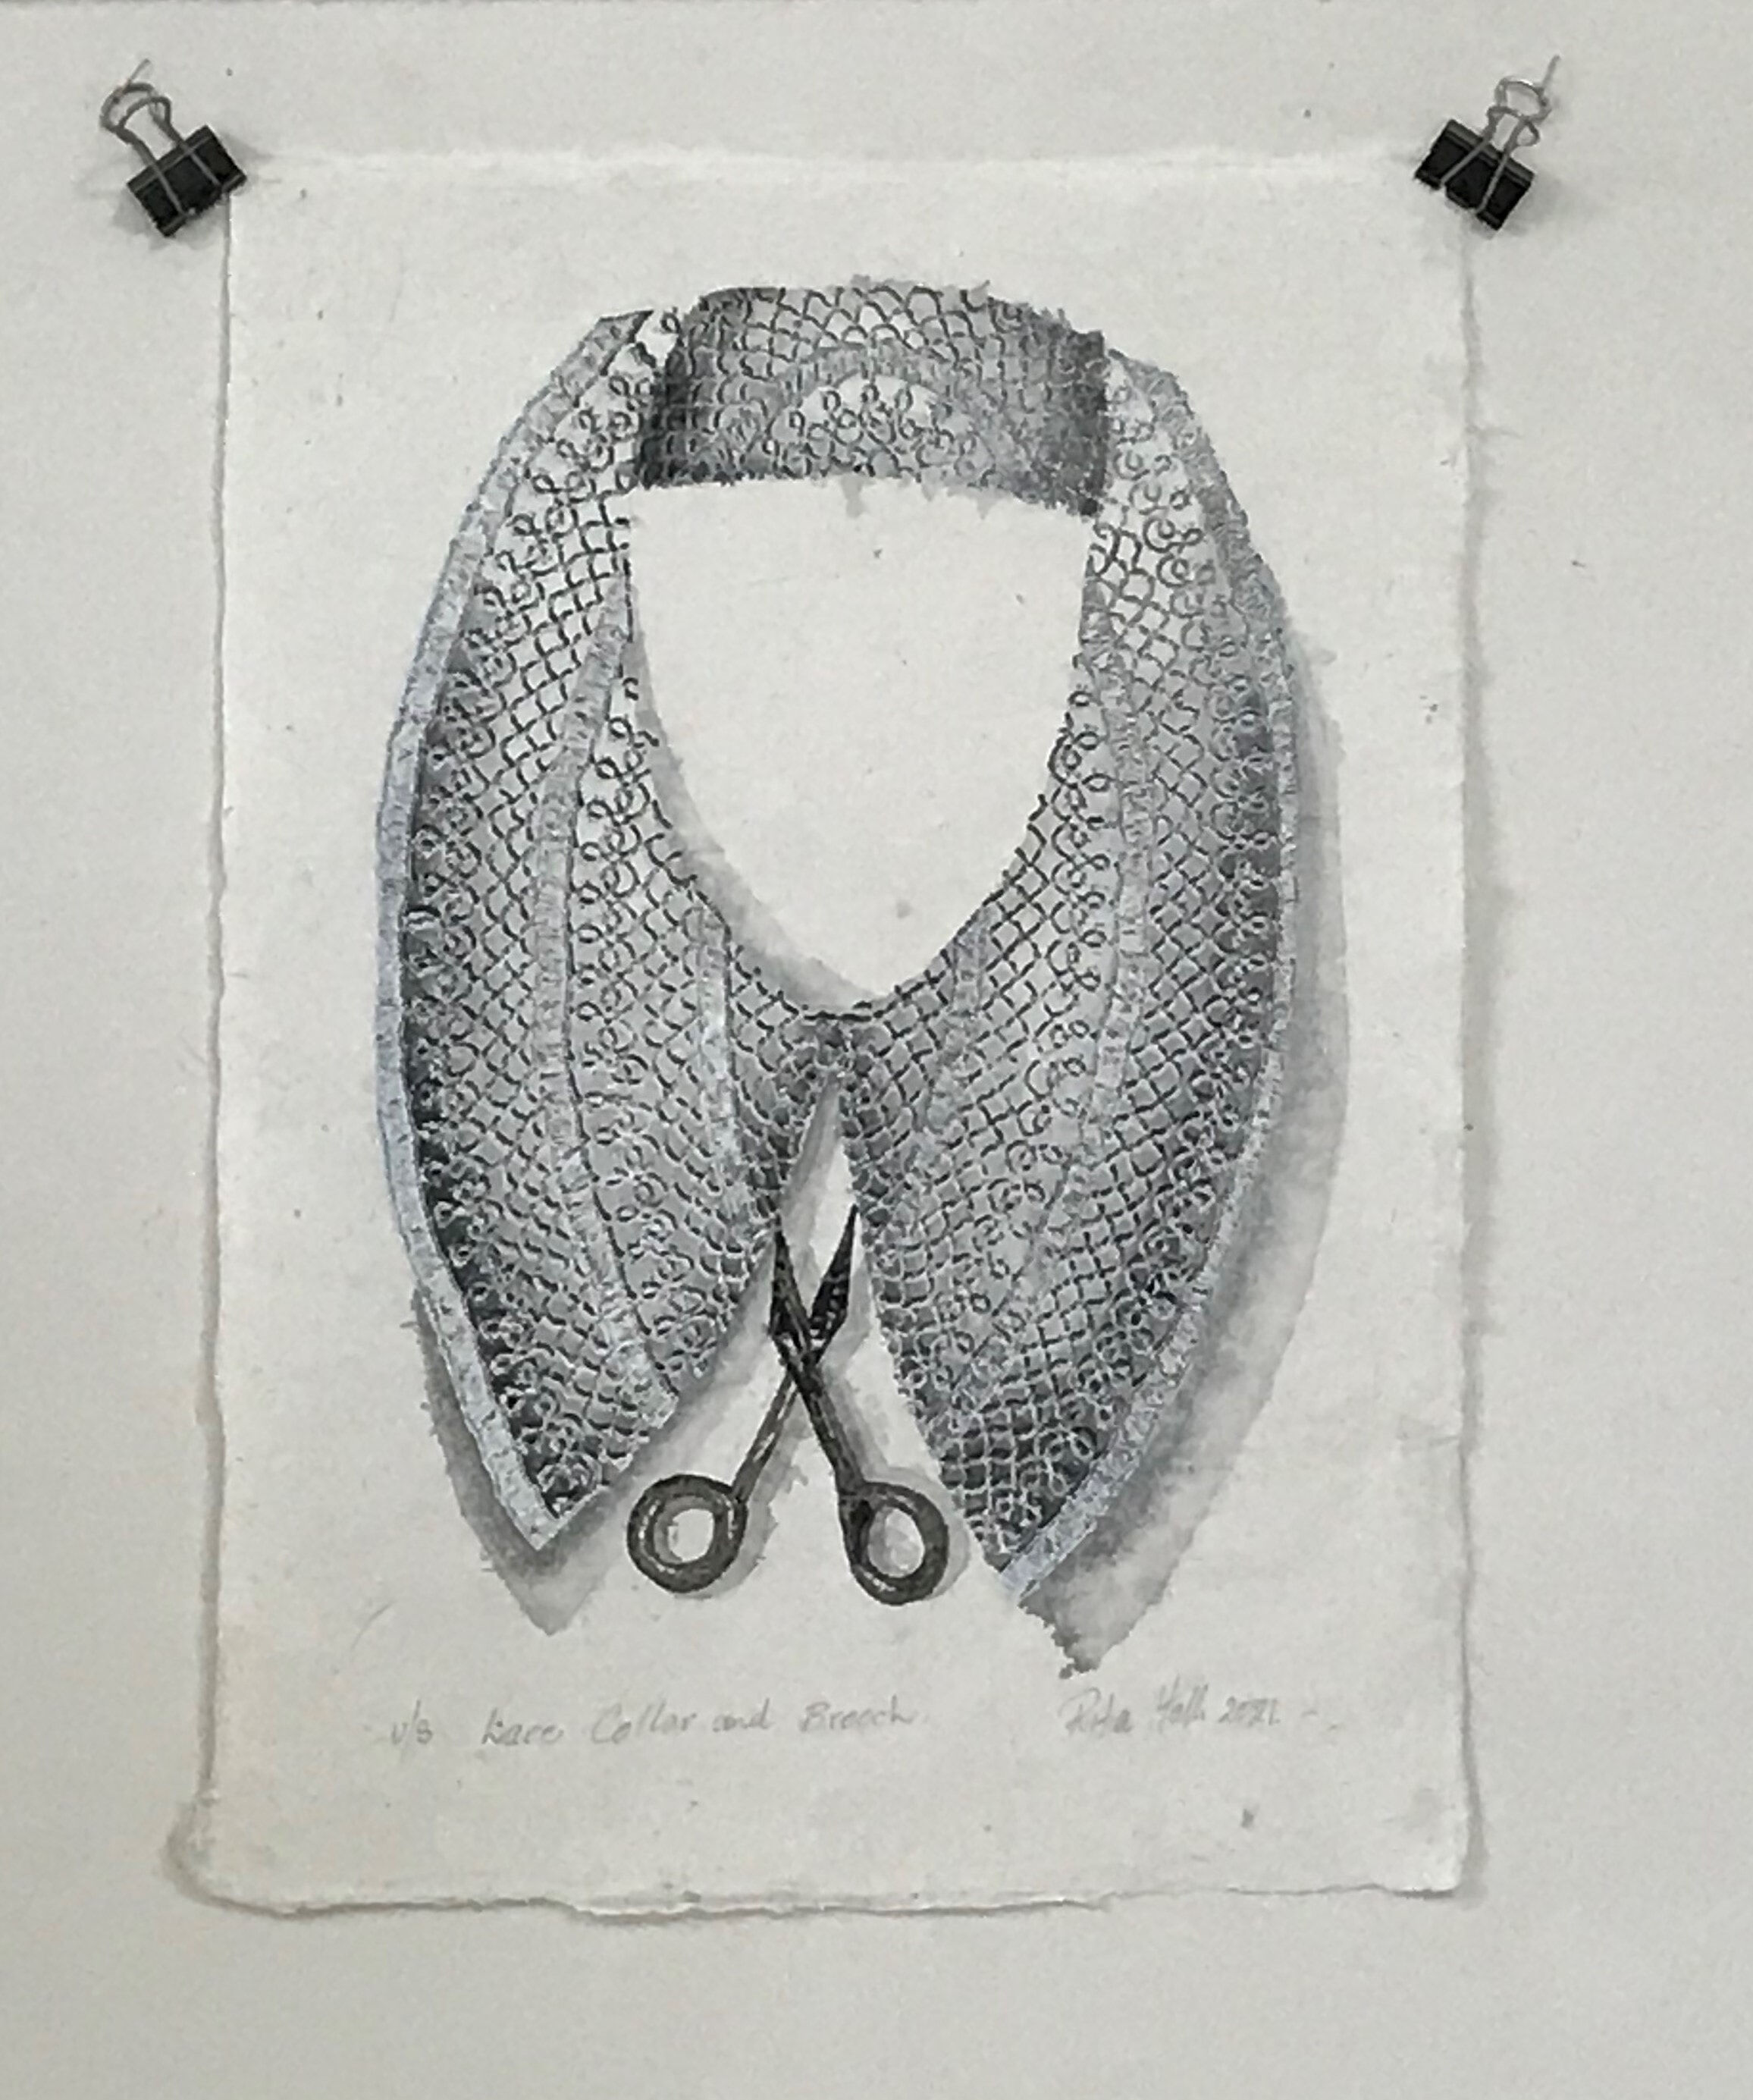 Lace Collar & Brooch V 2021 Collograph Watercolour on Mulberry Paper  44 x 31cm